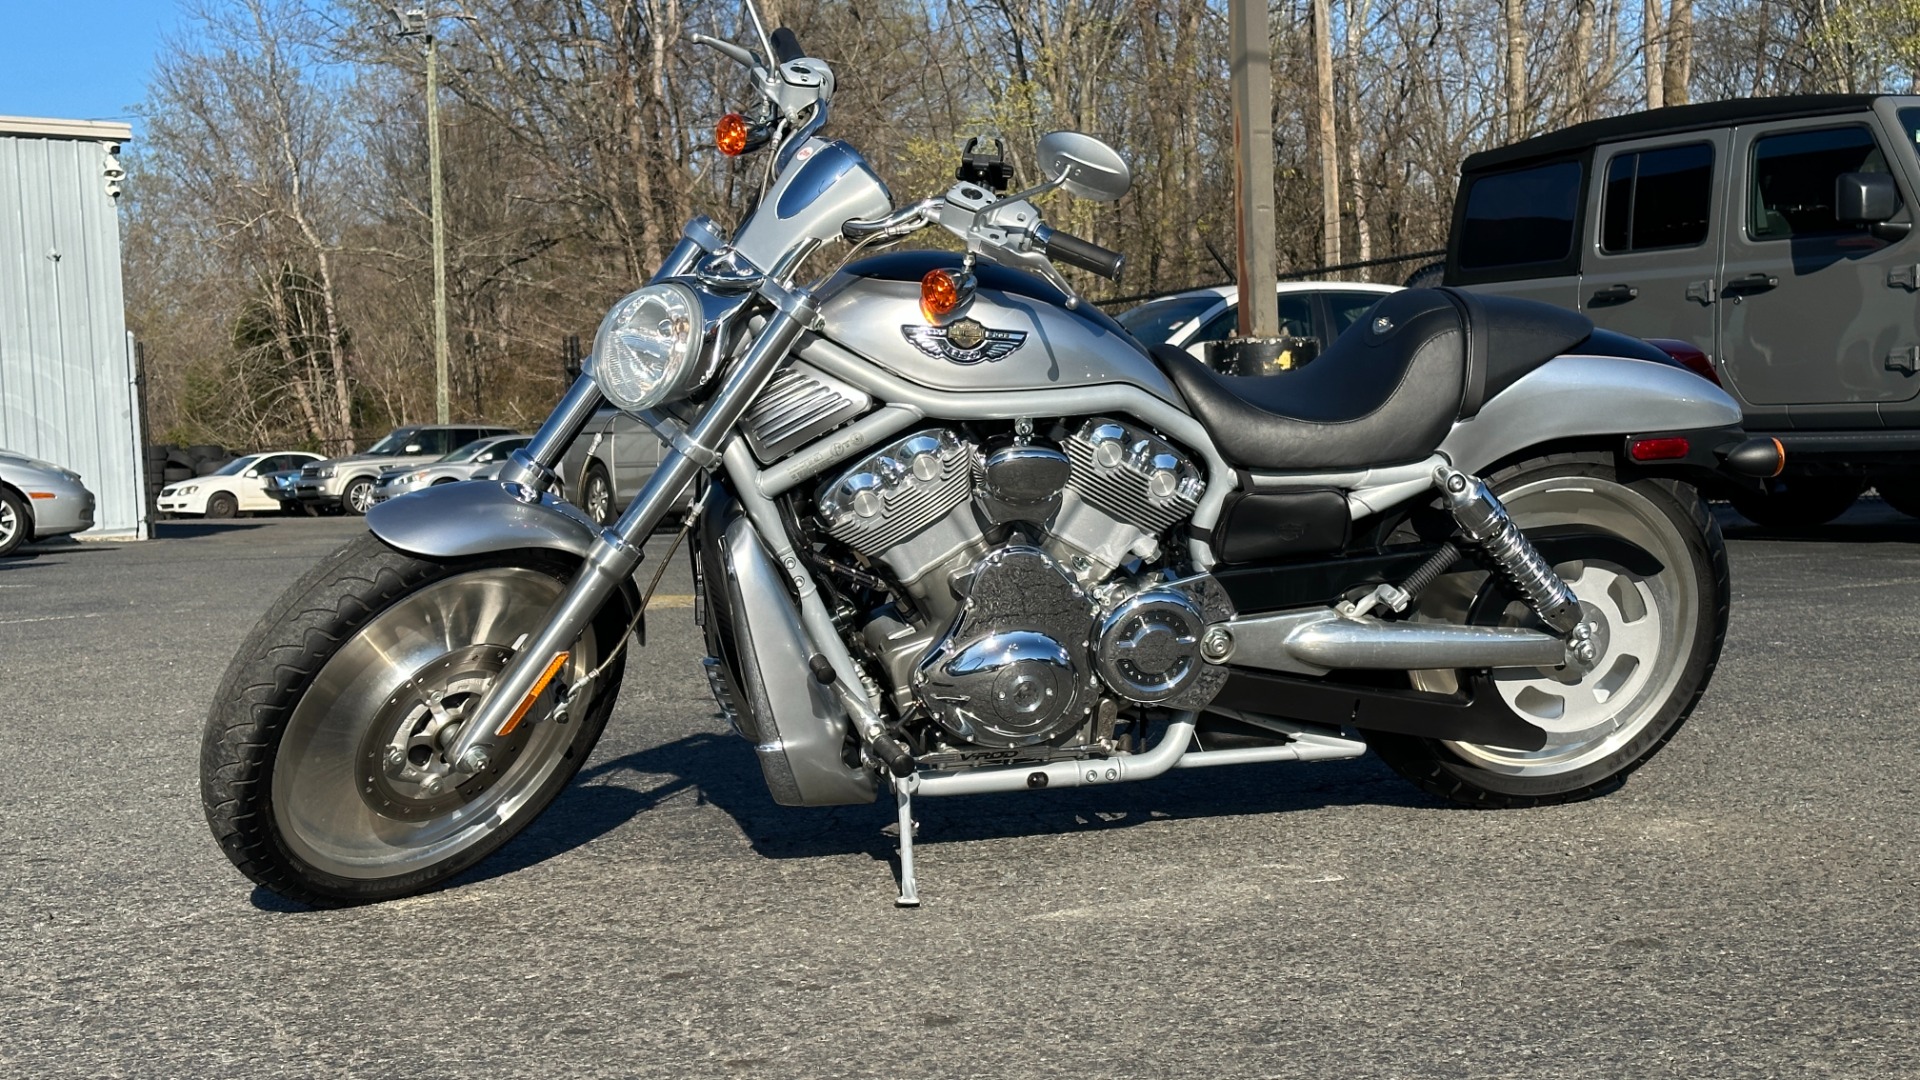 Used 2003 Harley Davidson V Rod ANNIVERSARY EDITION / 1130CC ENGINE / BREMBO BRAKES / VORTEX AIR SCOOPS for sale Sold at Formula Imports in Charlotte NC 28227 56